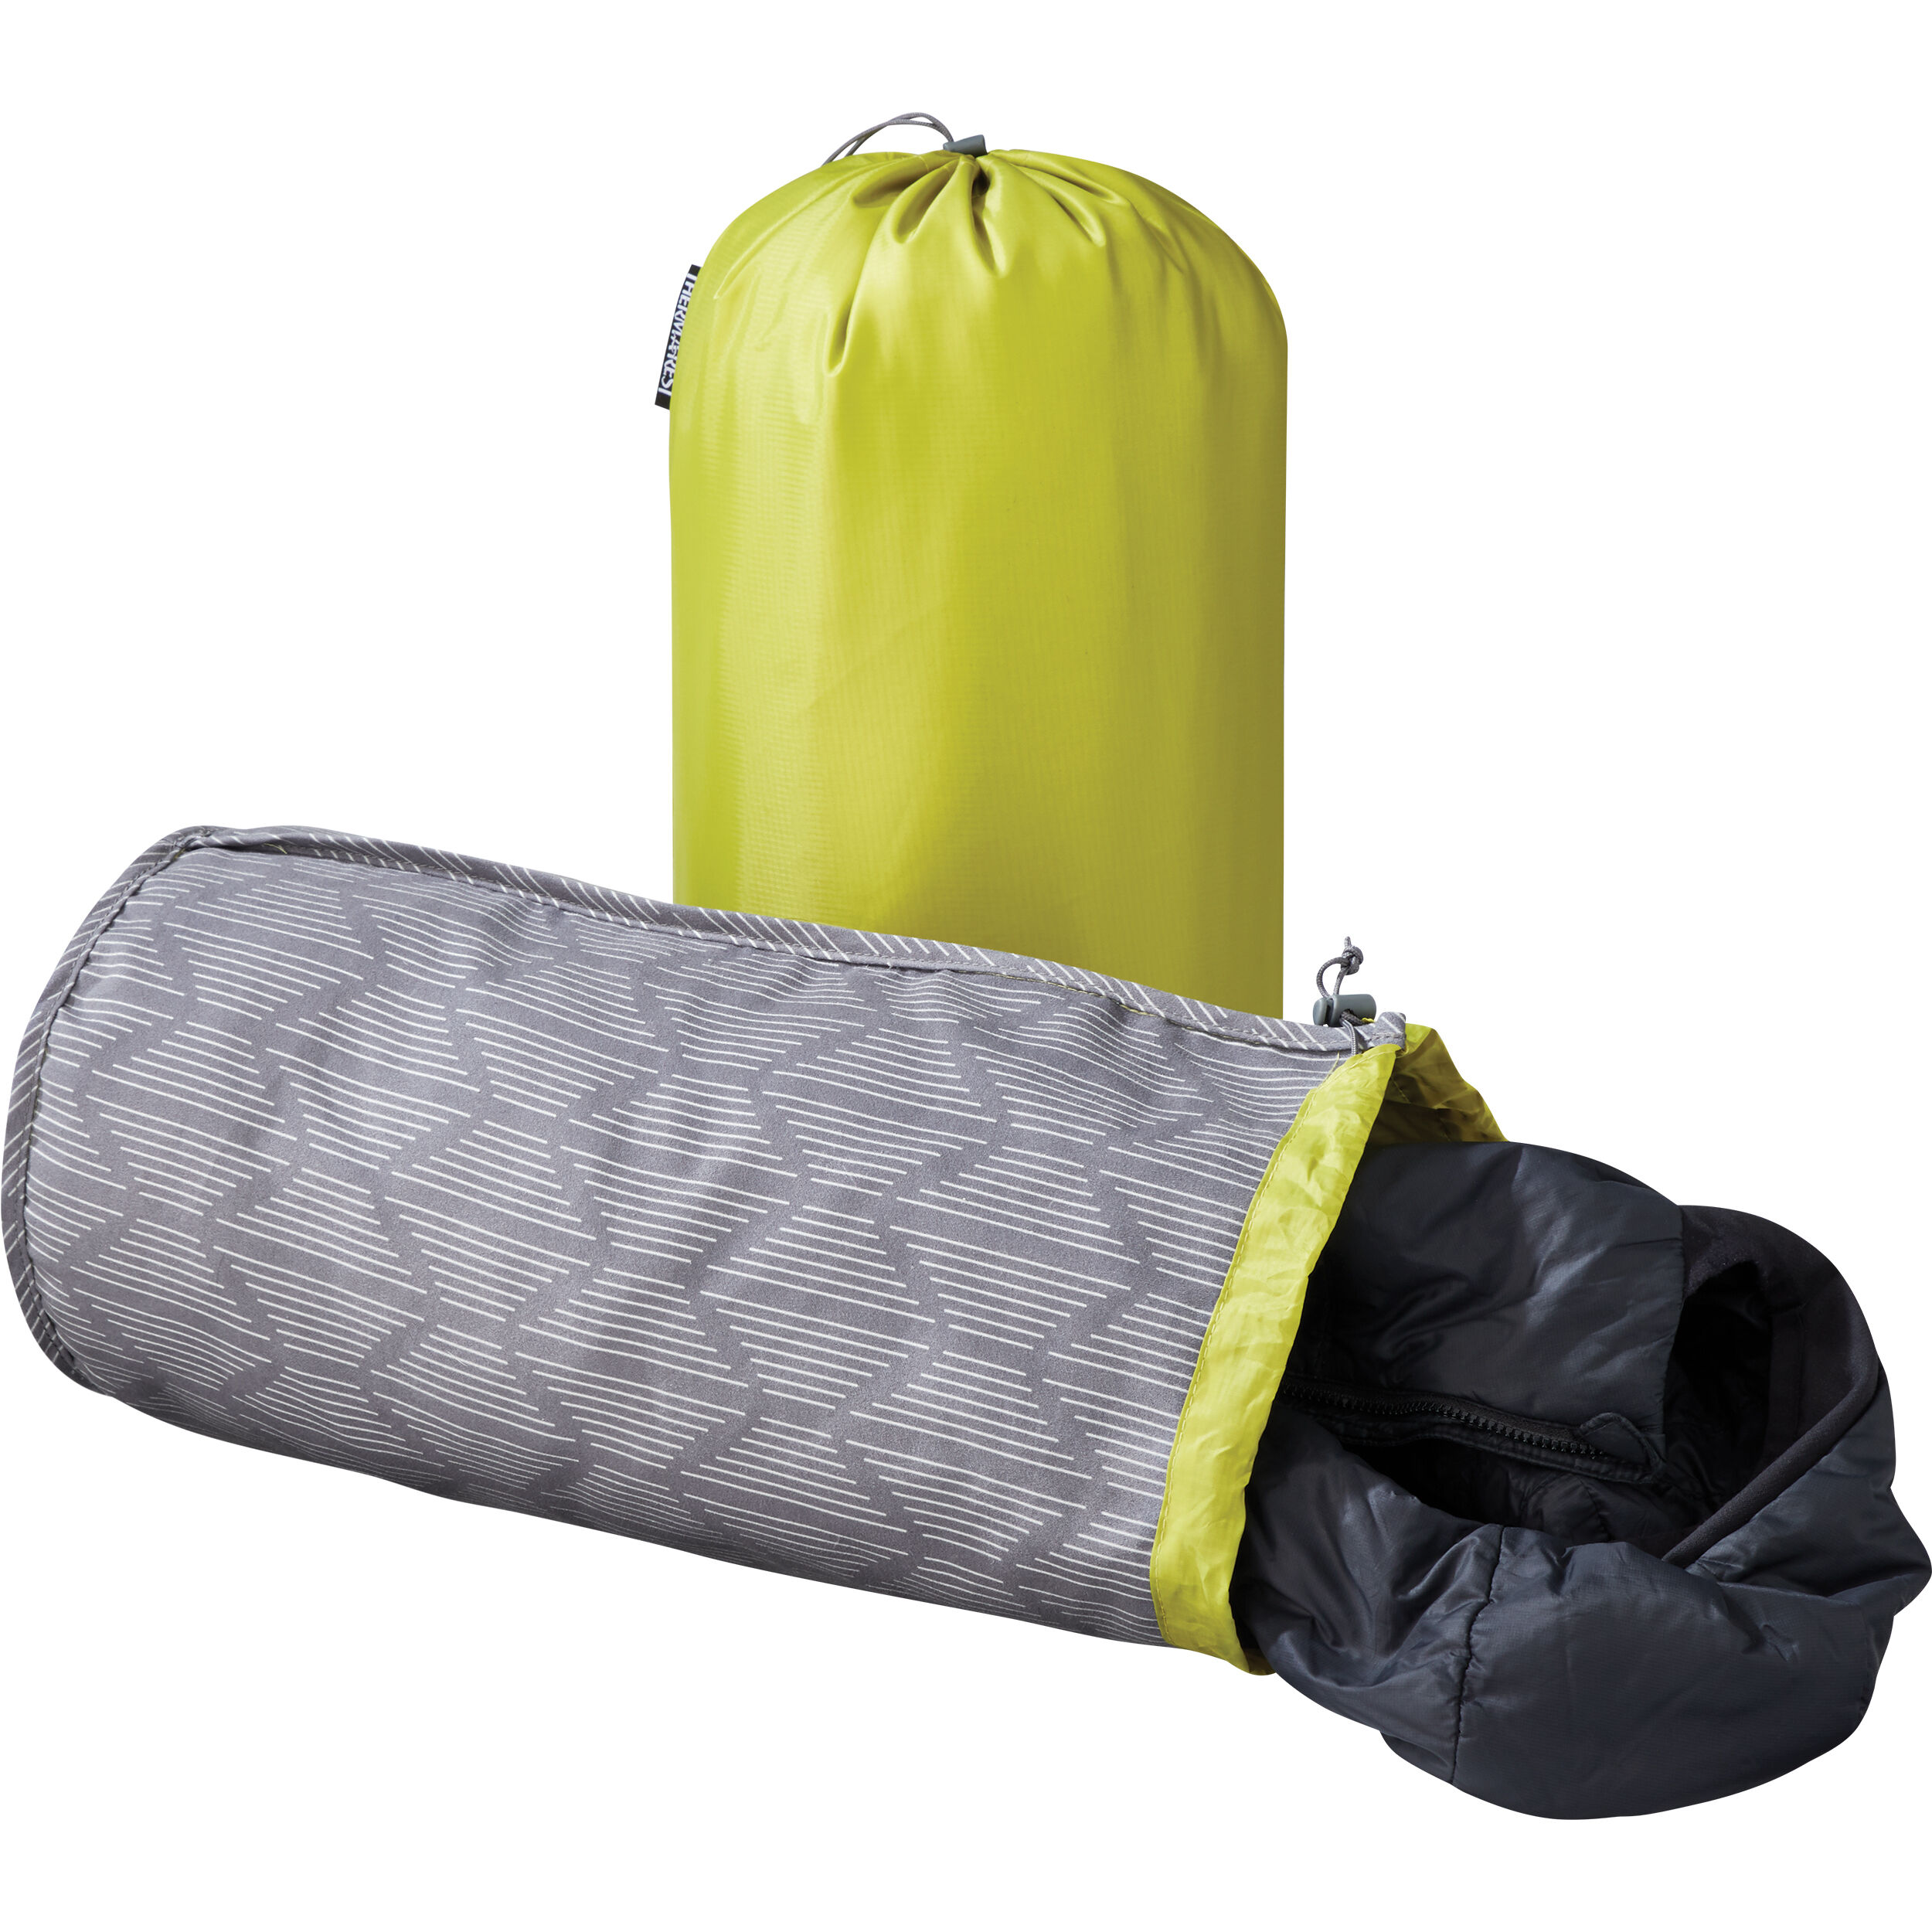 Stuff Sack Pillows | Backpacking & Camping | Therm-a-Rest